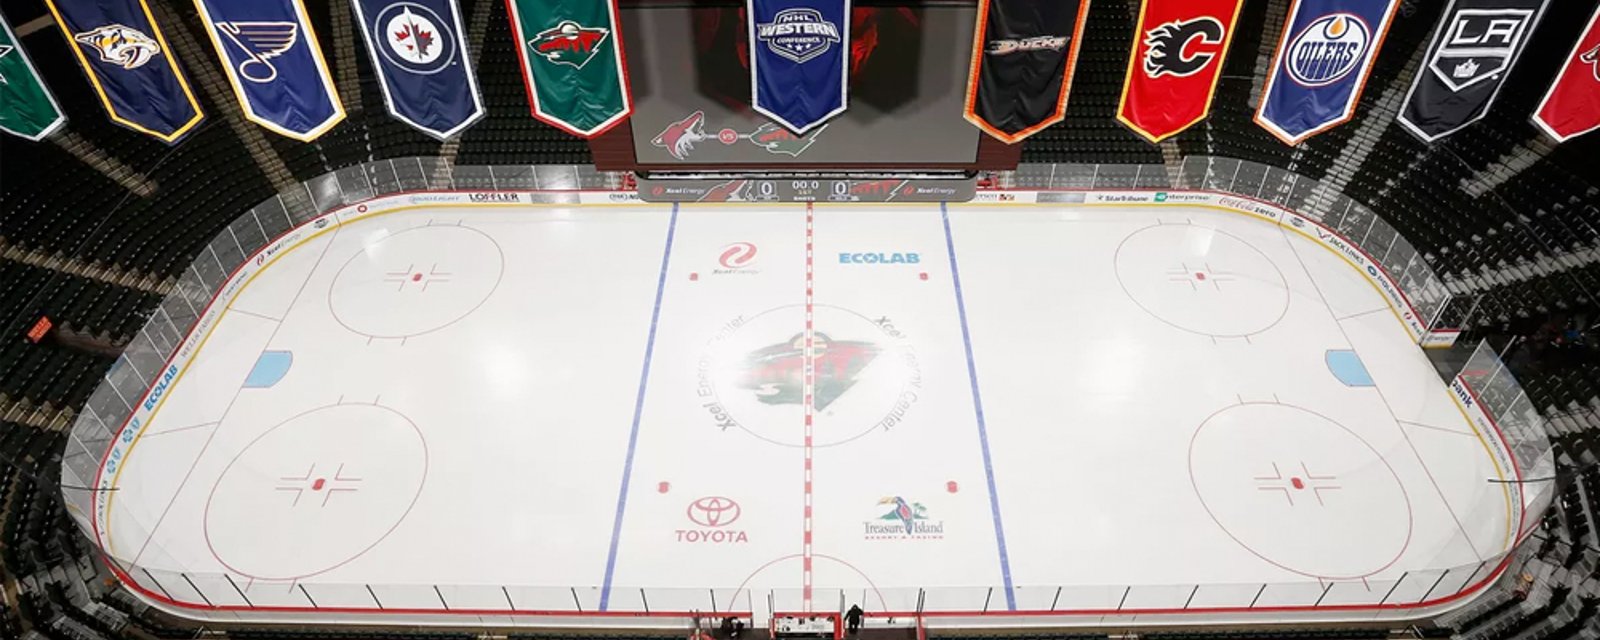  Two NHL teams singled out to host games when play resumes